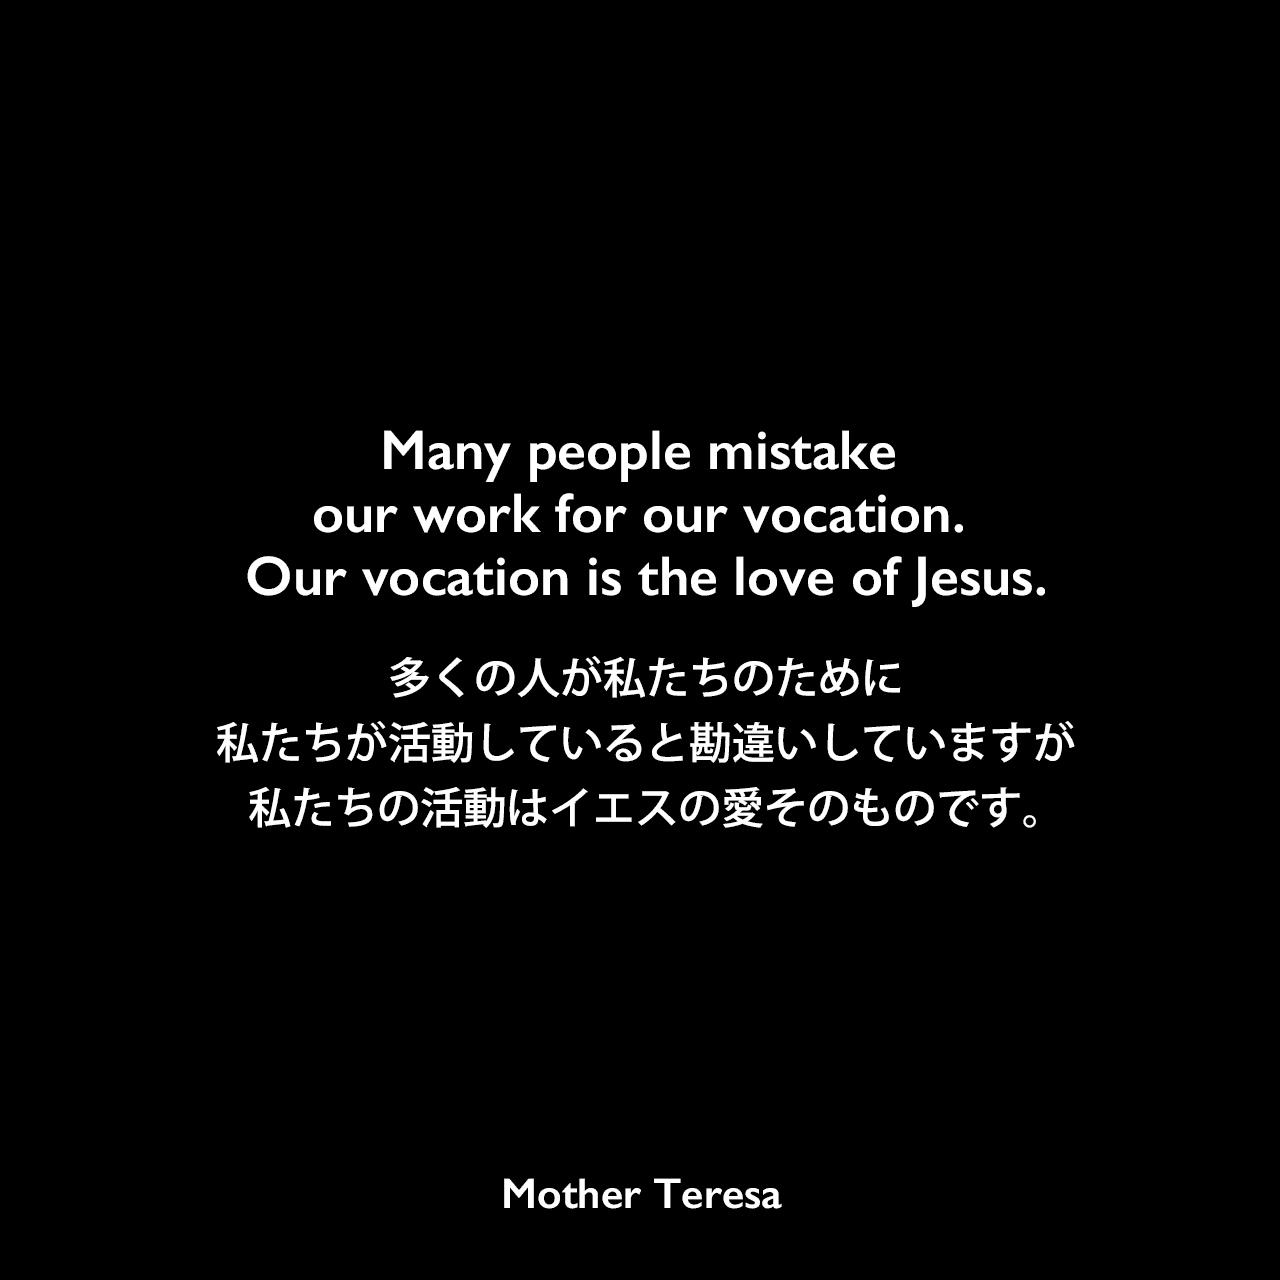 Many people mistake our work for our vocation. Our vocation is the love of Jesus.多くの人が私たちのために私たちが活動していると勘違いしていますが、私たちの活動はイエスの愛そのものです。Mother Teresa